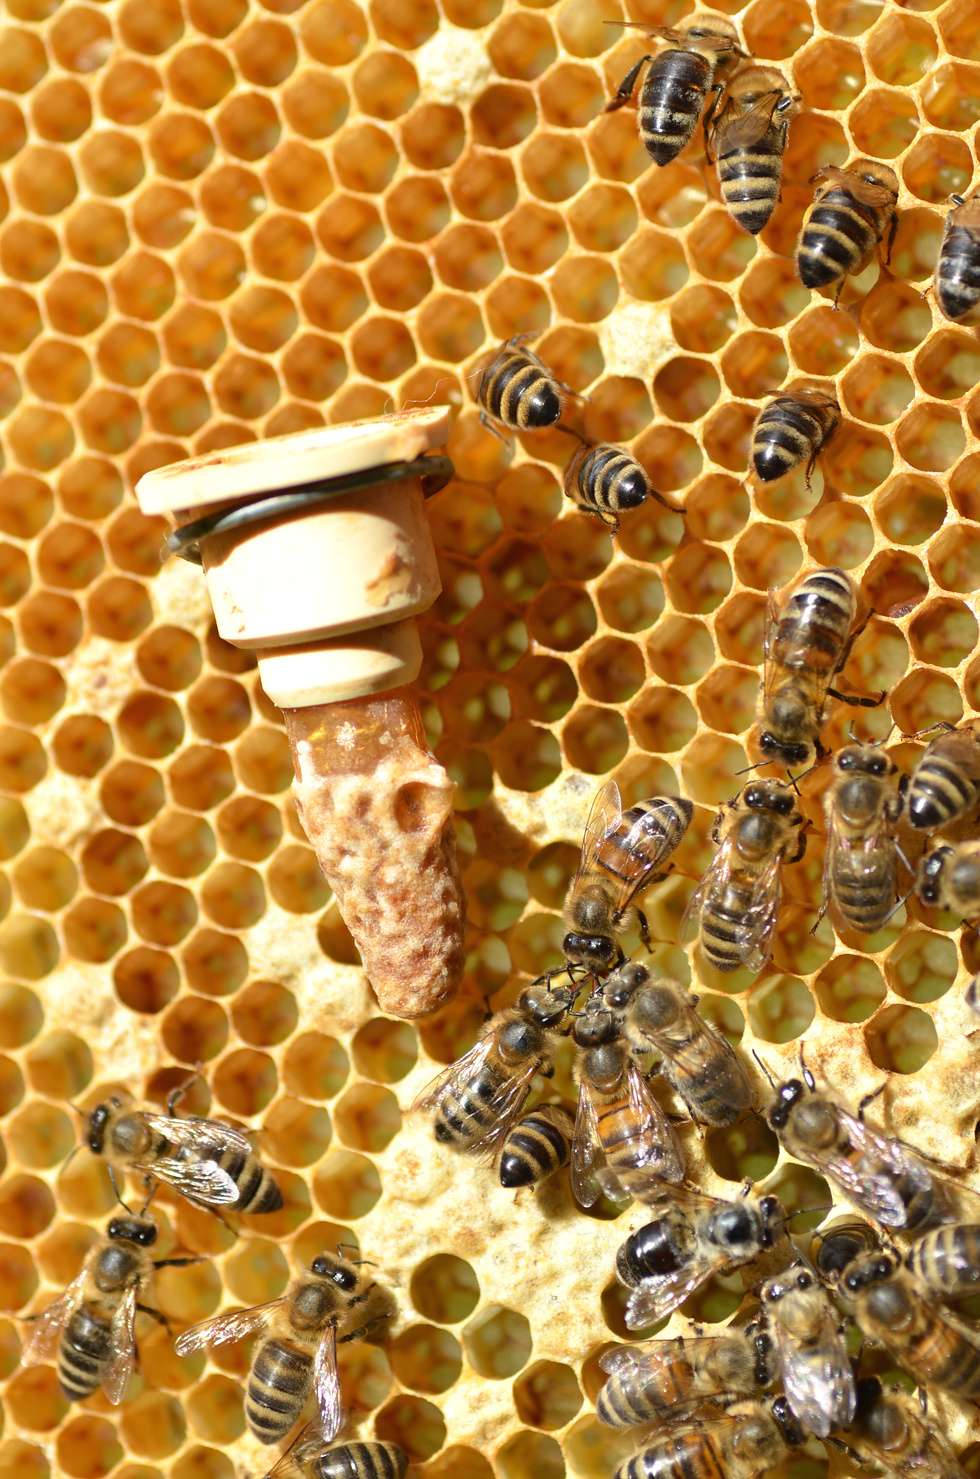 queen bees cell and plenty of bees on honeycomb